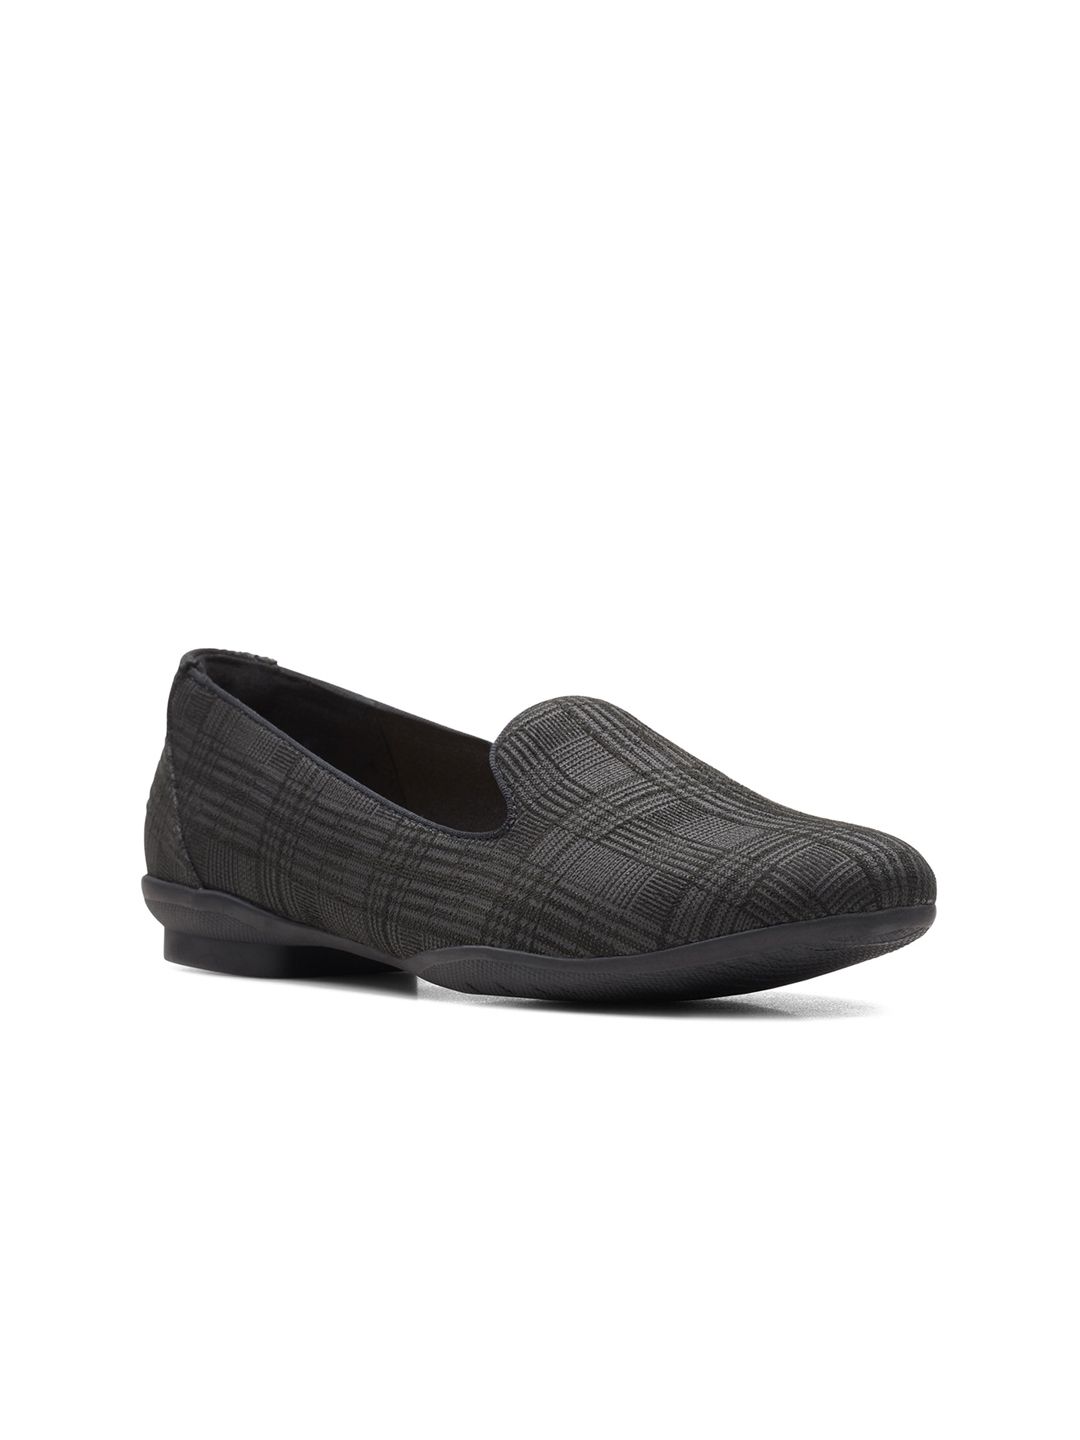 Clarks Women Black Textured Loafers Price in India